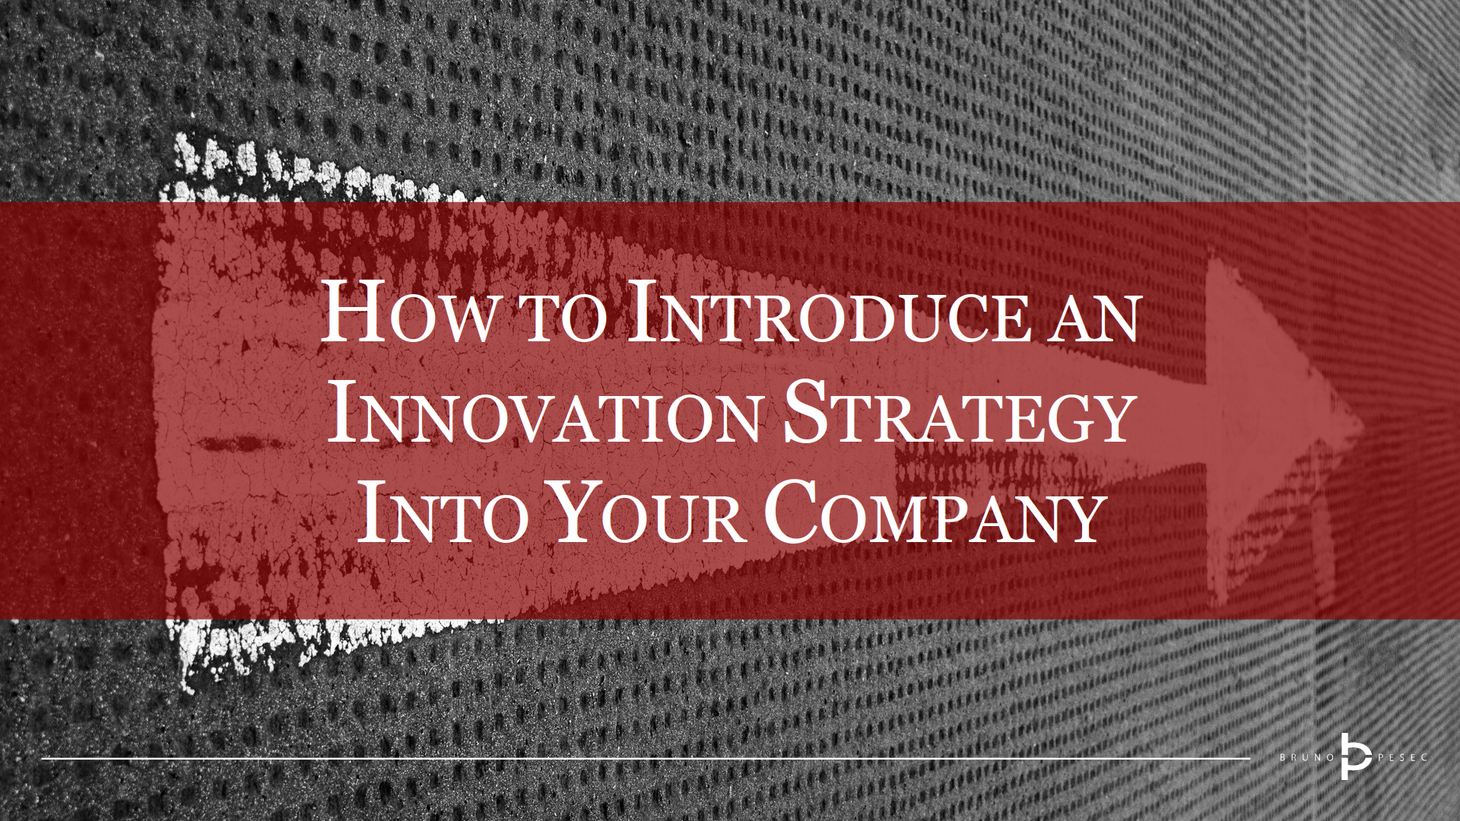 How to introduce an innovation strategy into your company